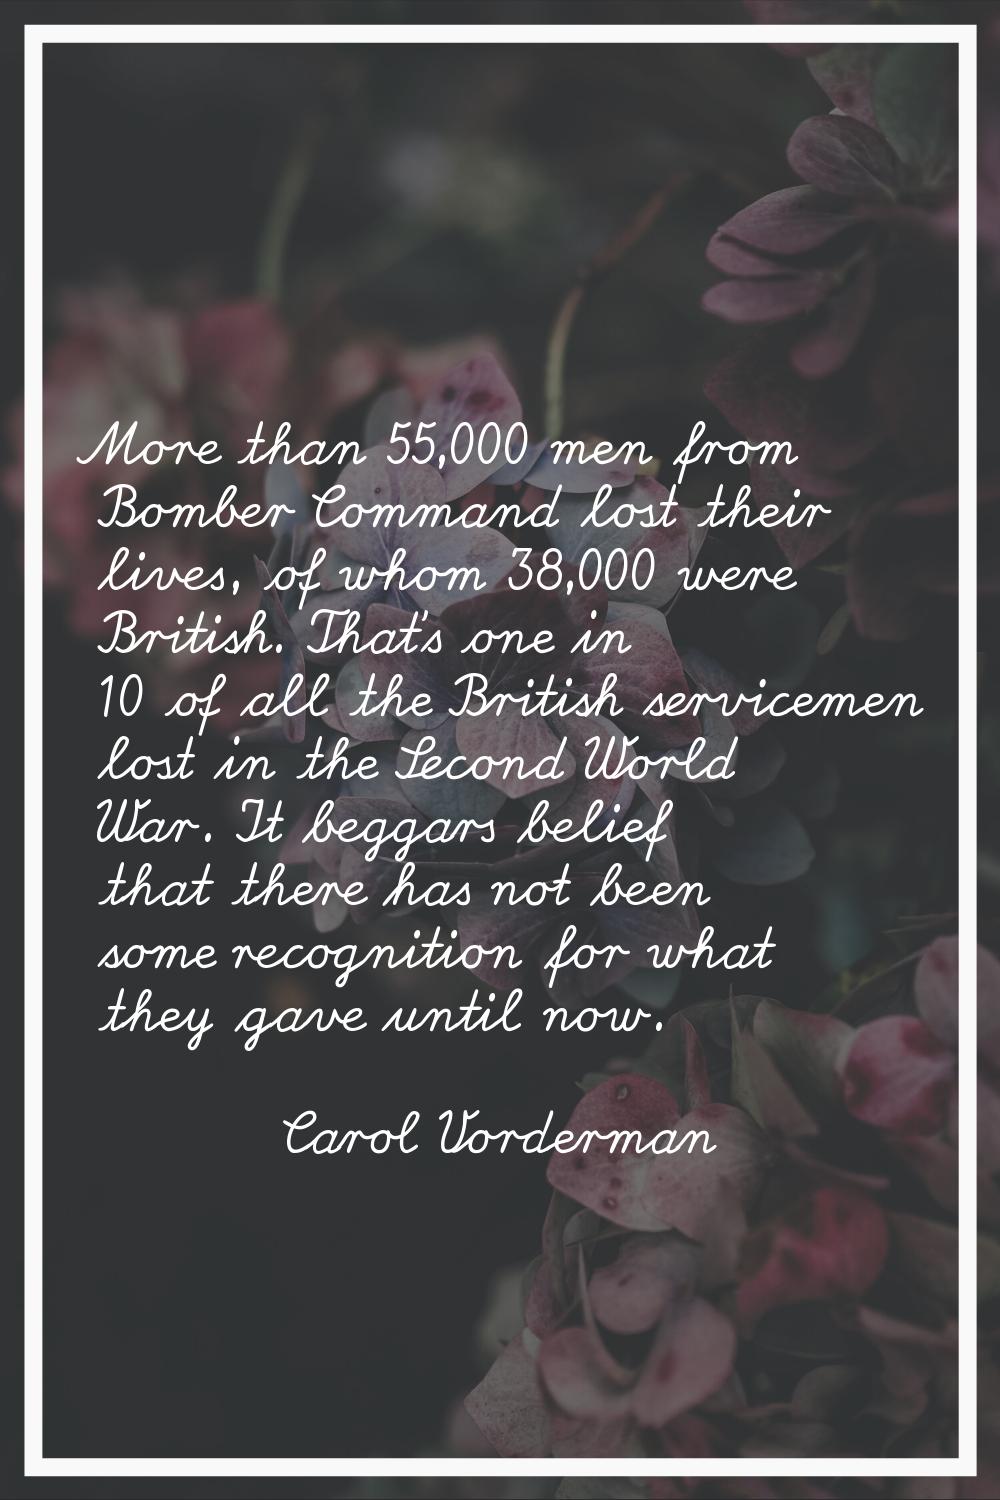 More than 55,000 men from Bomber Command lost their lives, of whom 38,000 were British. That's one 